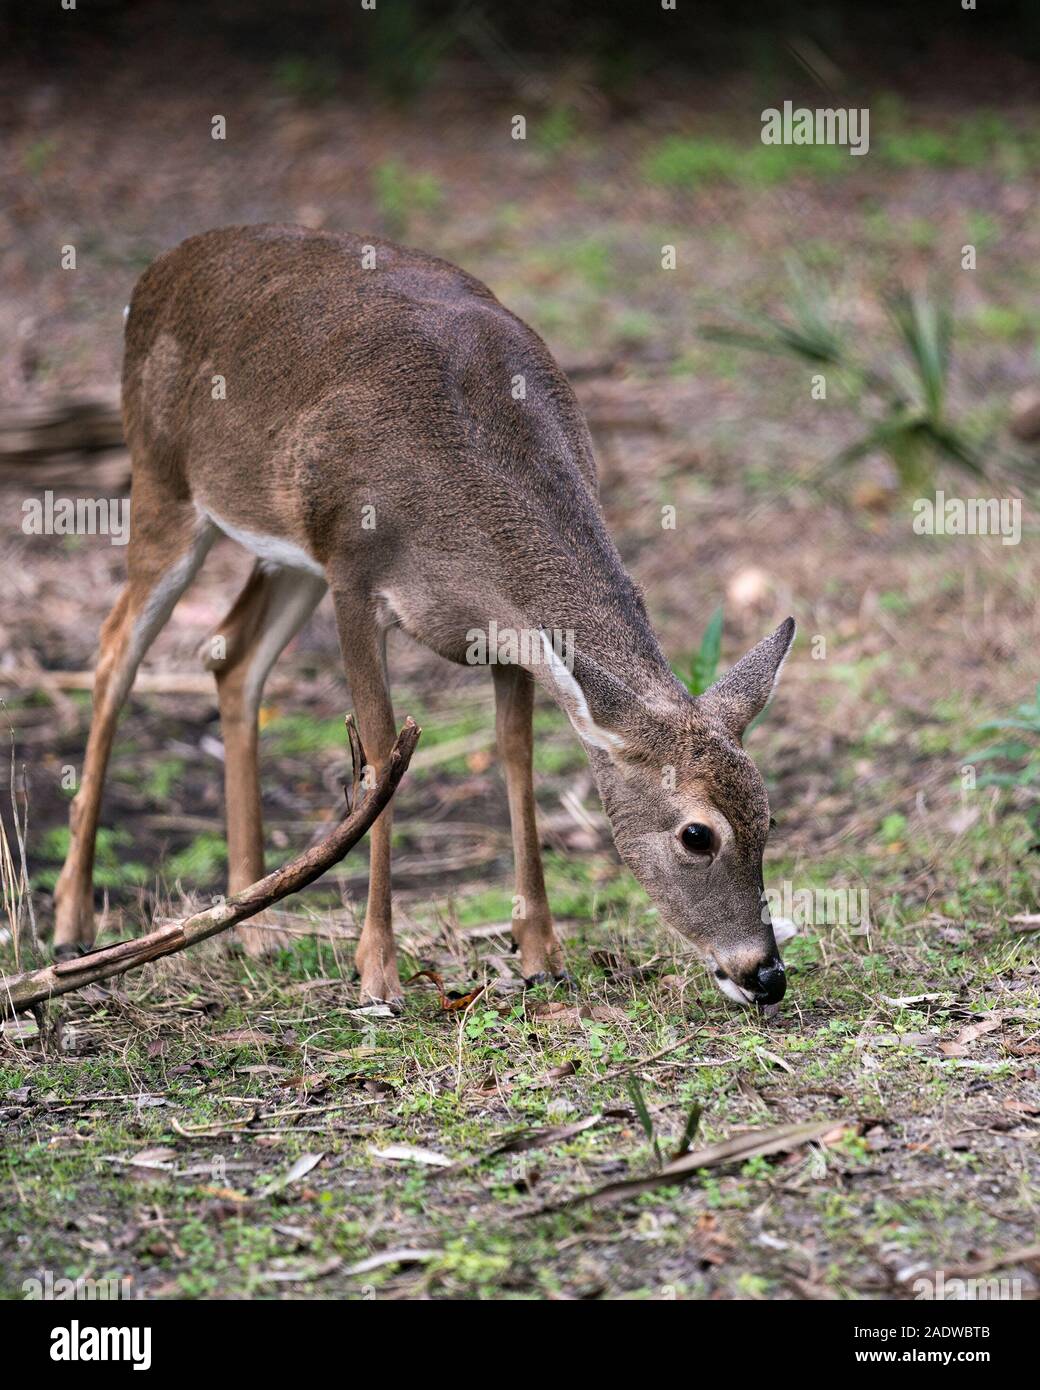 Deer animal White-tailed dear head close-up profile view with foliage background exposing its head,  ears, eye, mouth, nose, brown fur. Stock Photo